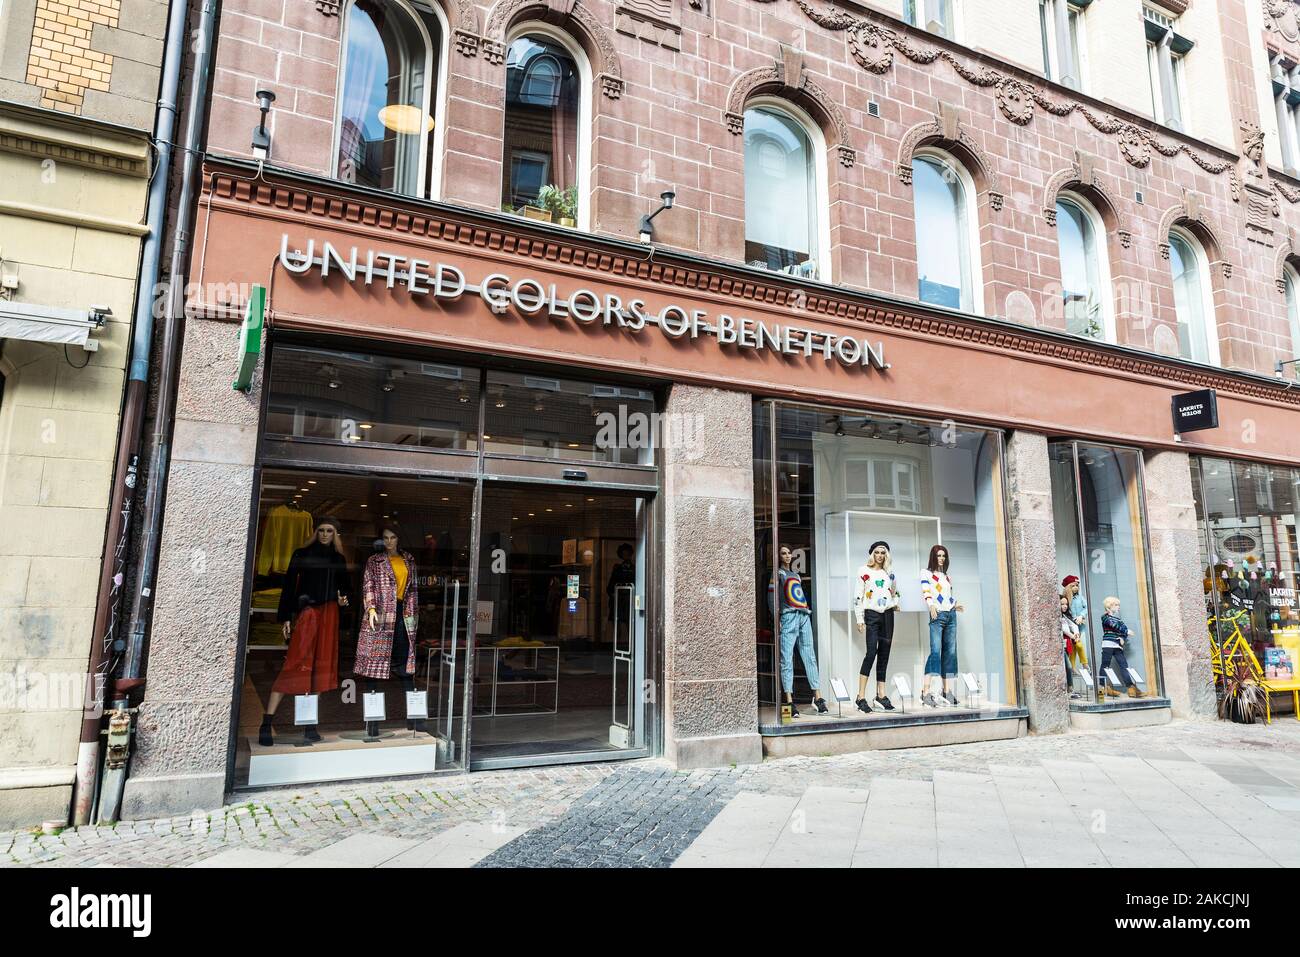 Malmo, Sweden - August 29, 2019: Facade of a United Colors of Benetton  clothing store in Malmö, Sweden Stock Photo - Alamy